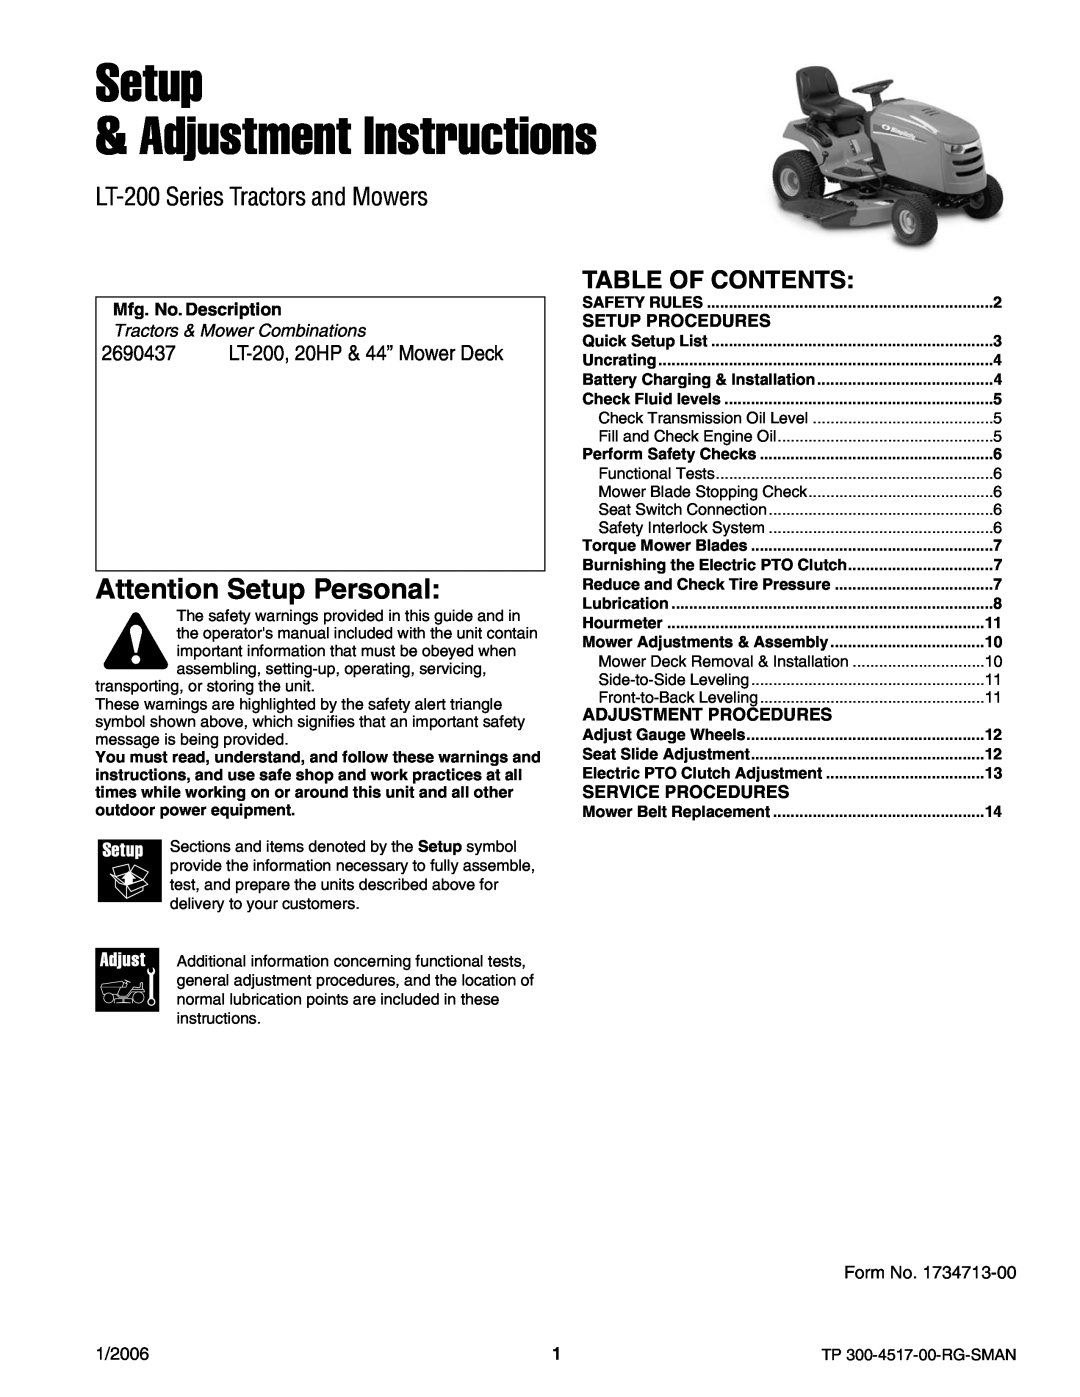 Briggs & Stratton manual Attention Setup Personal, LT-200 Series Tractors and Mowers, Table Of Contents, Safety Rules 